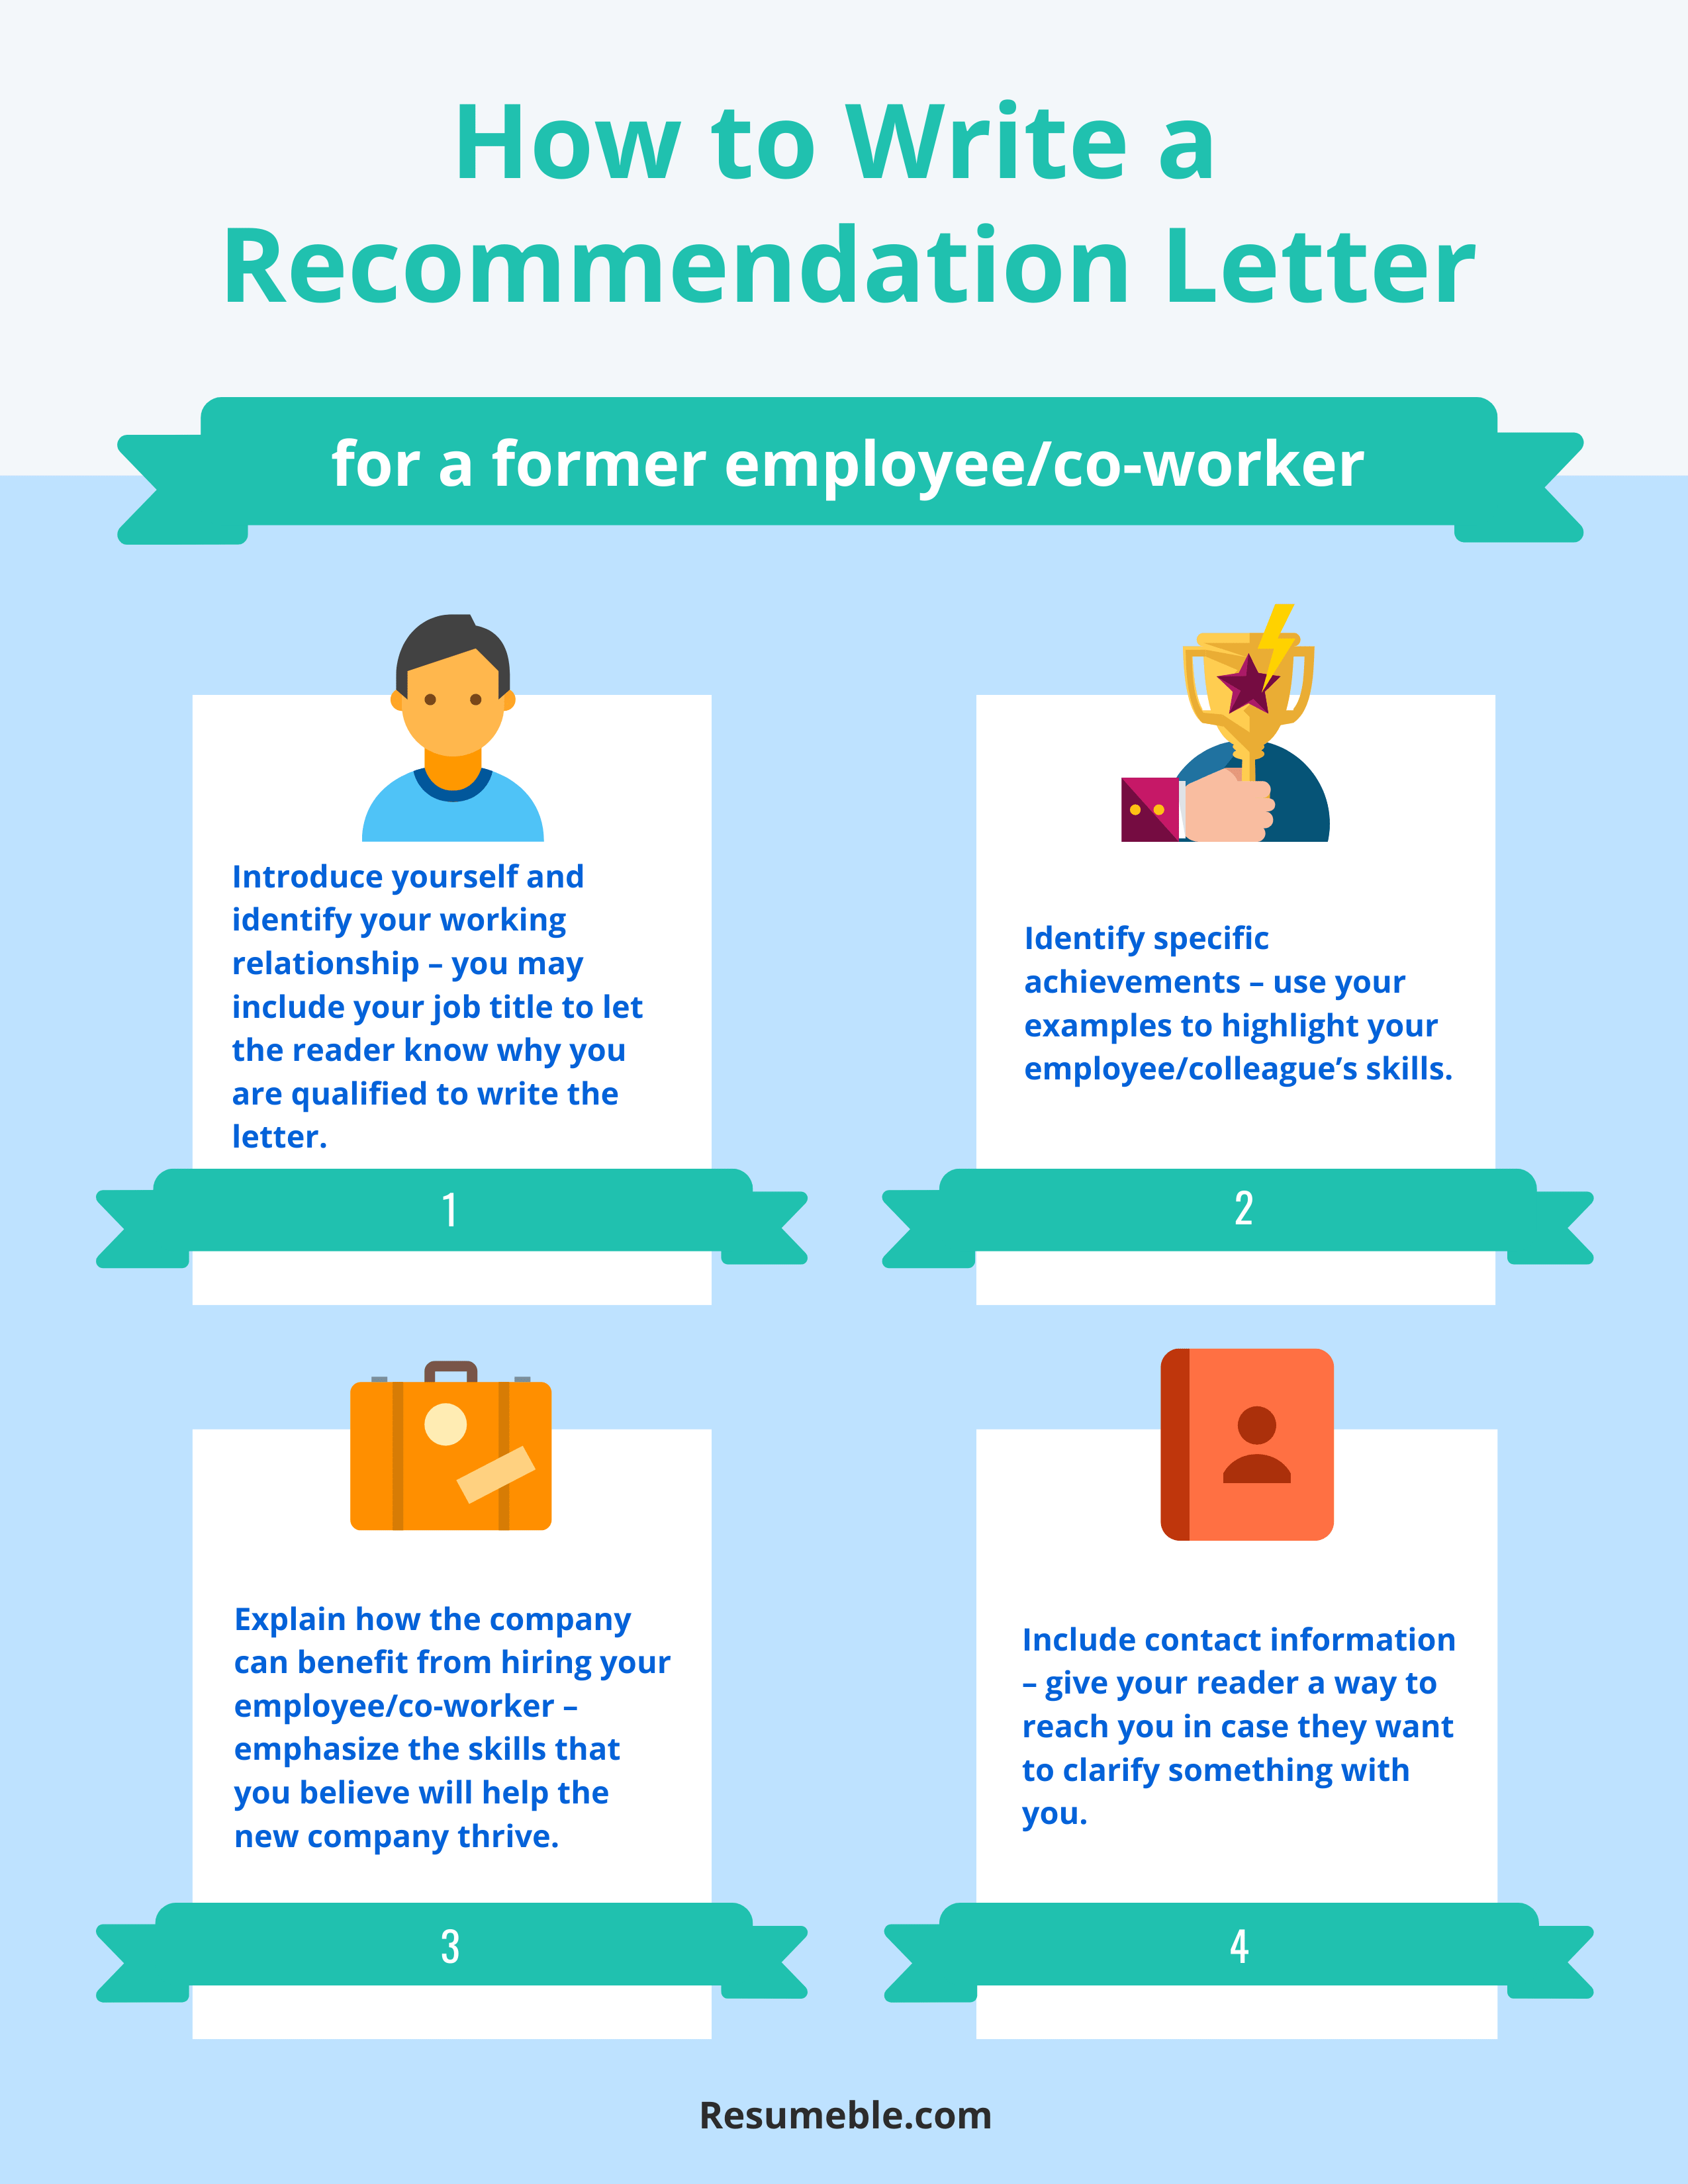 How to write a recommendation letter